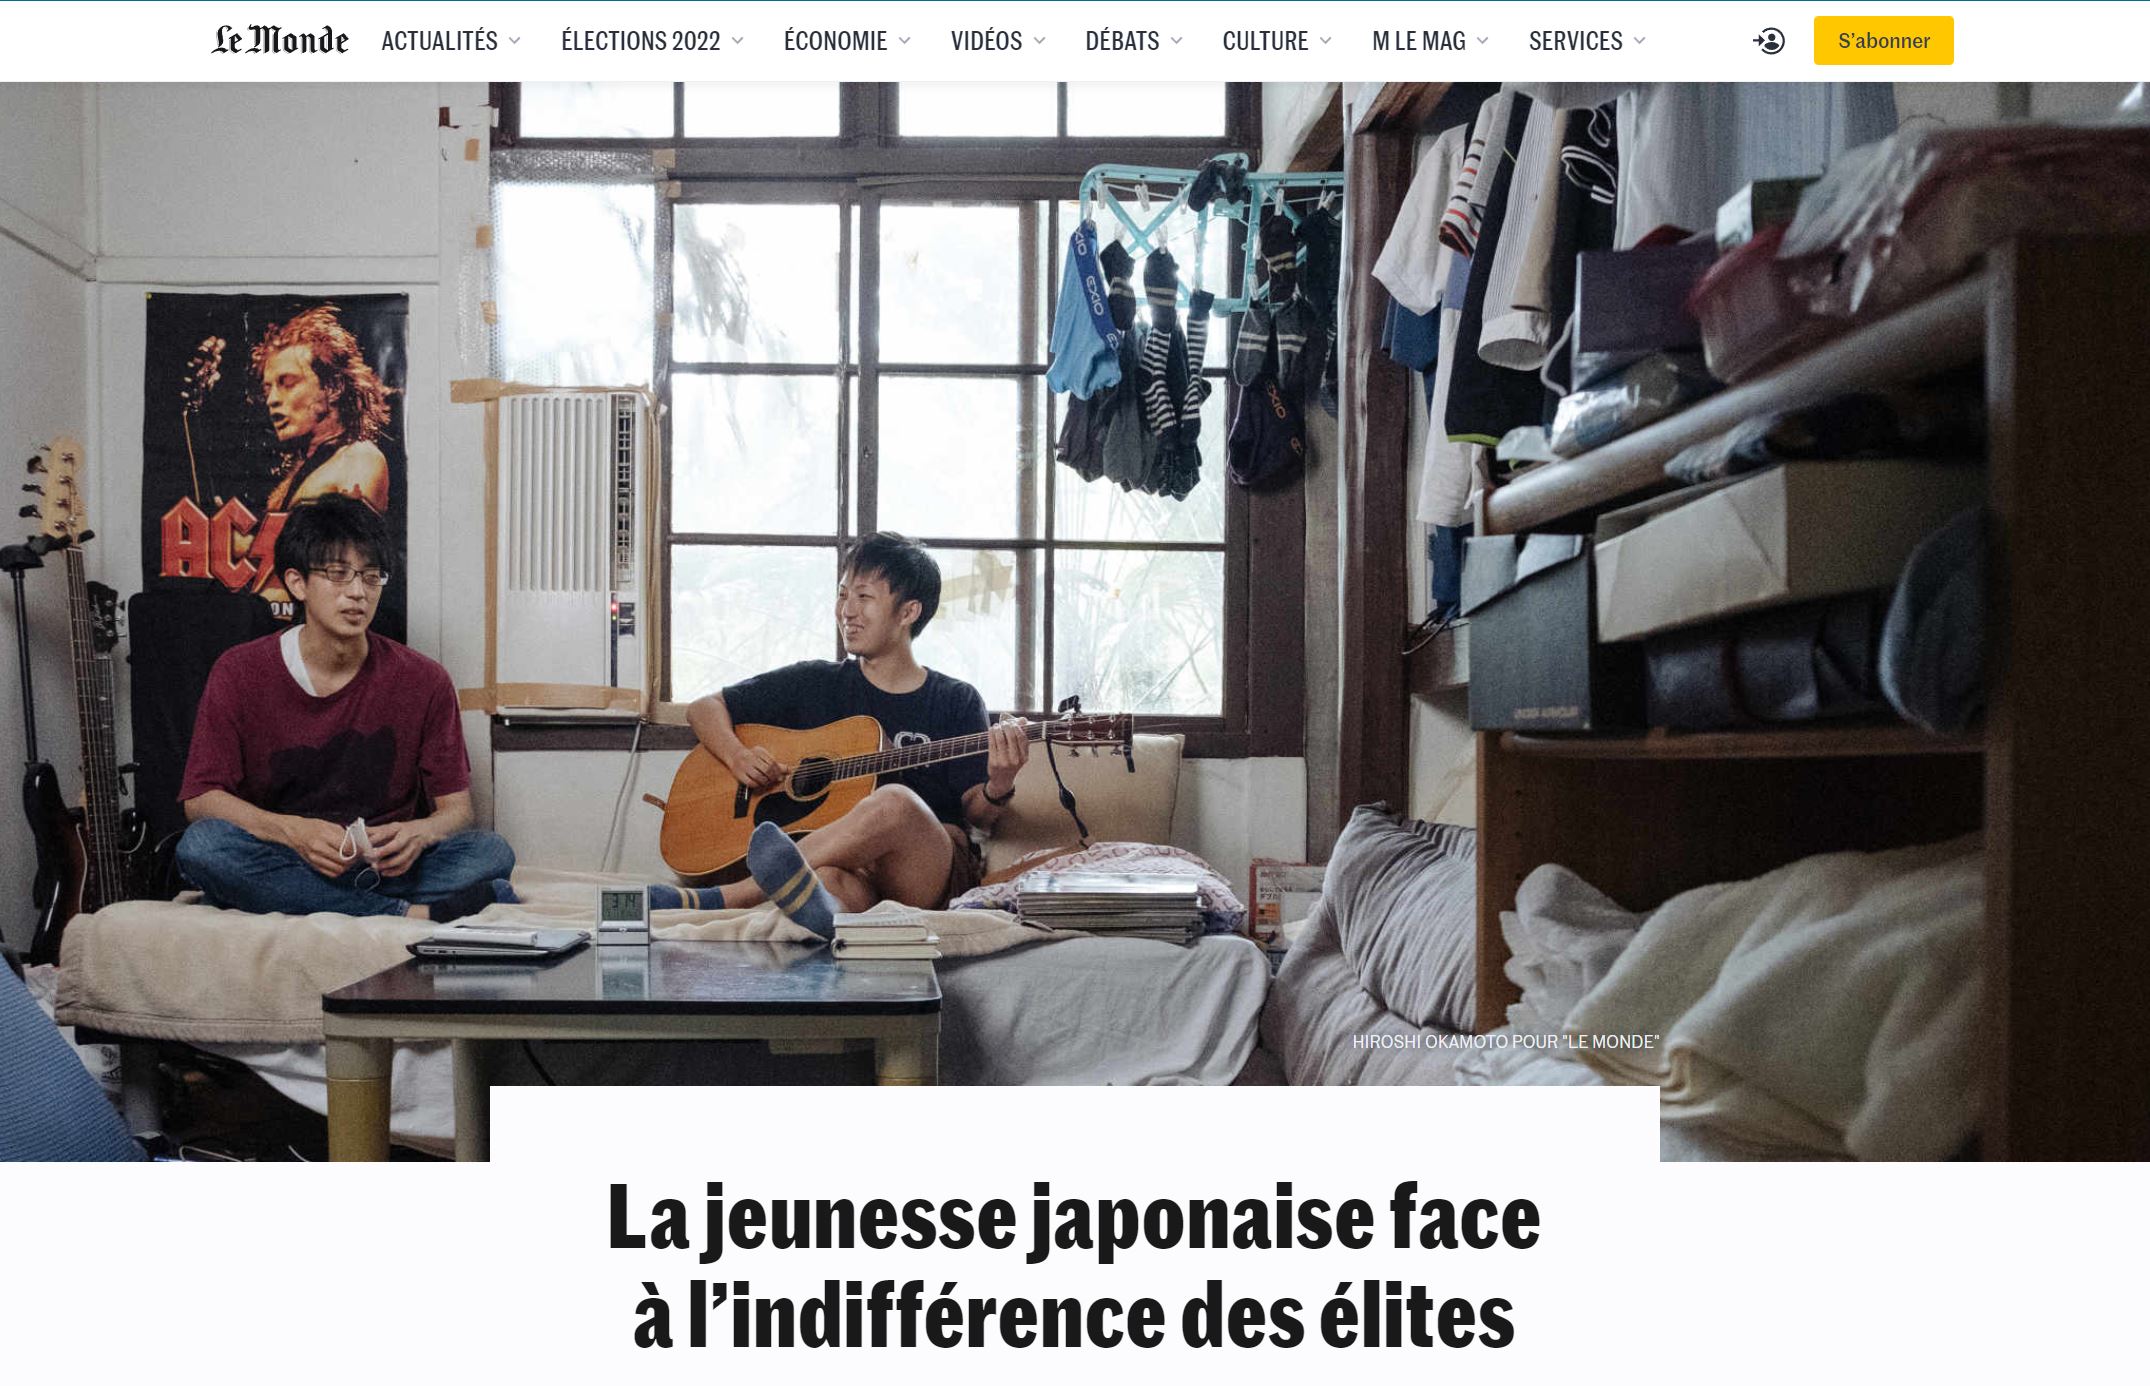 Tokyo Olympic 2020 and Young Generation in Japan - The Yoshida Dormitory -  / Le Monde - Duplicate